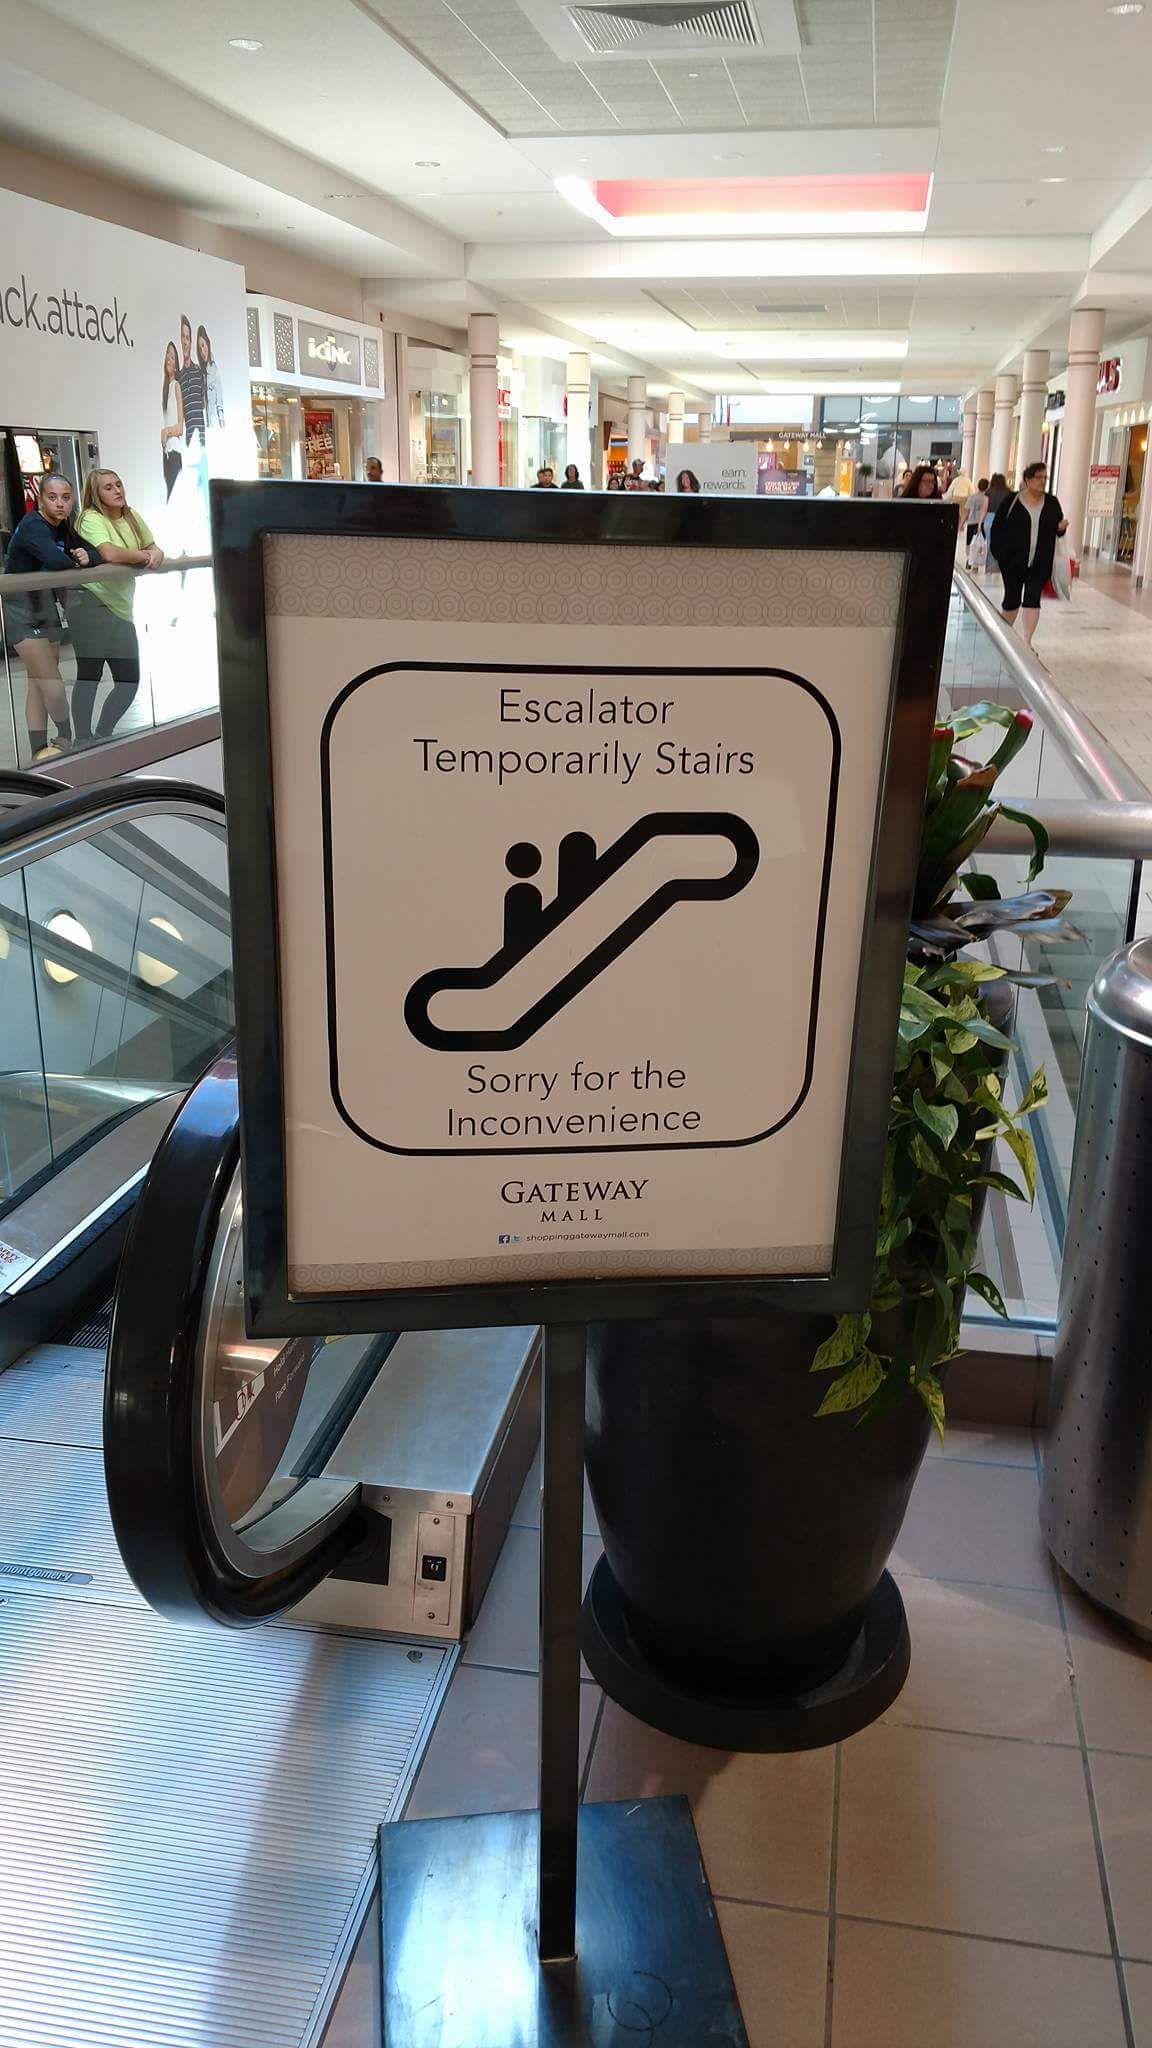 Seen at the local mall.